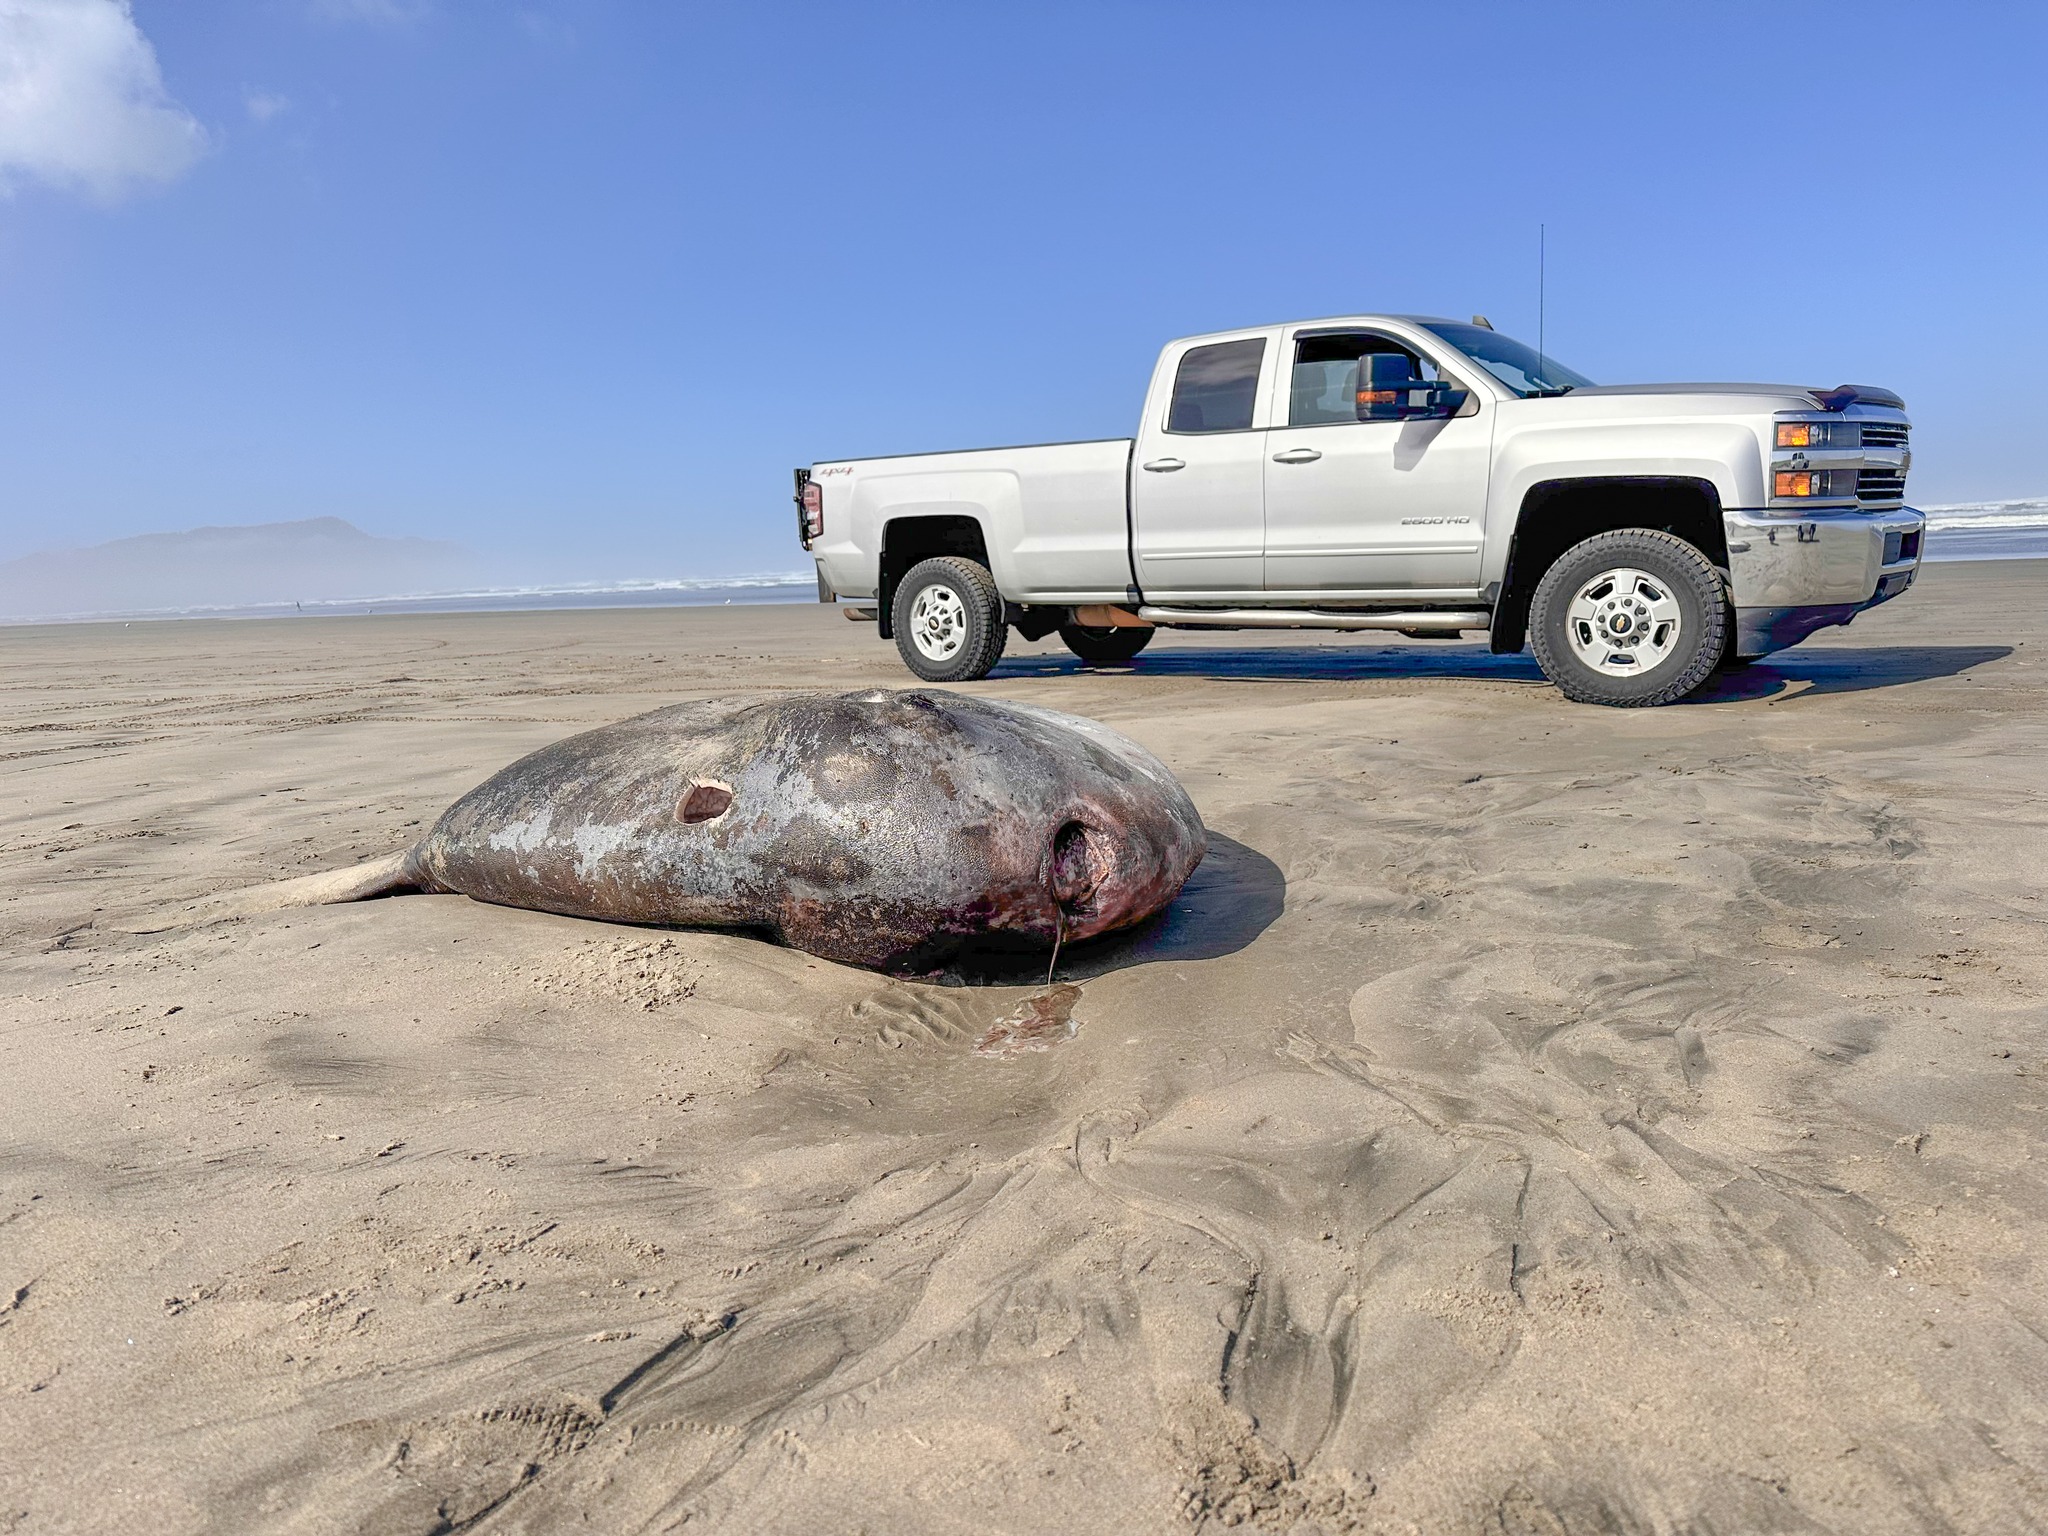 Mola Tecta, also known as the Hoodwinker Sunfish, lying on it's side on the sand. In this picture, a silver truck is on the beach behind the massive fish.